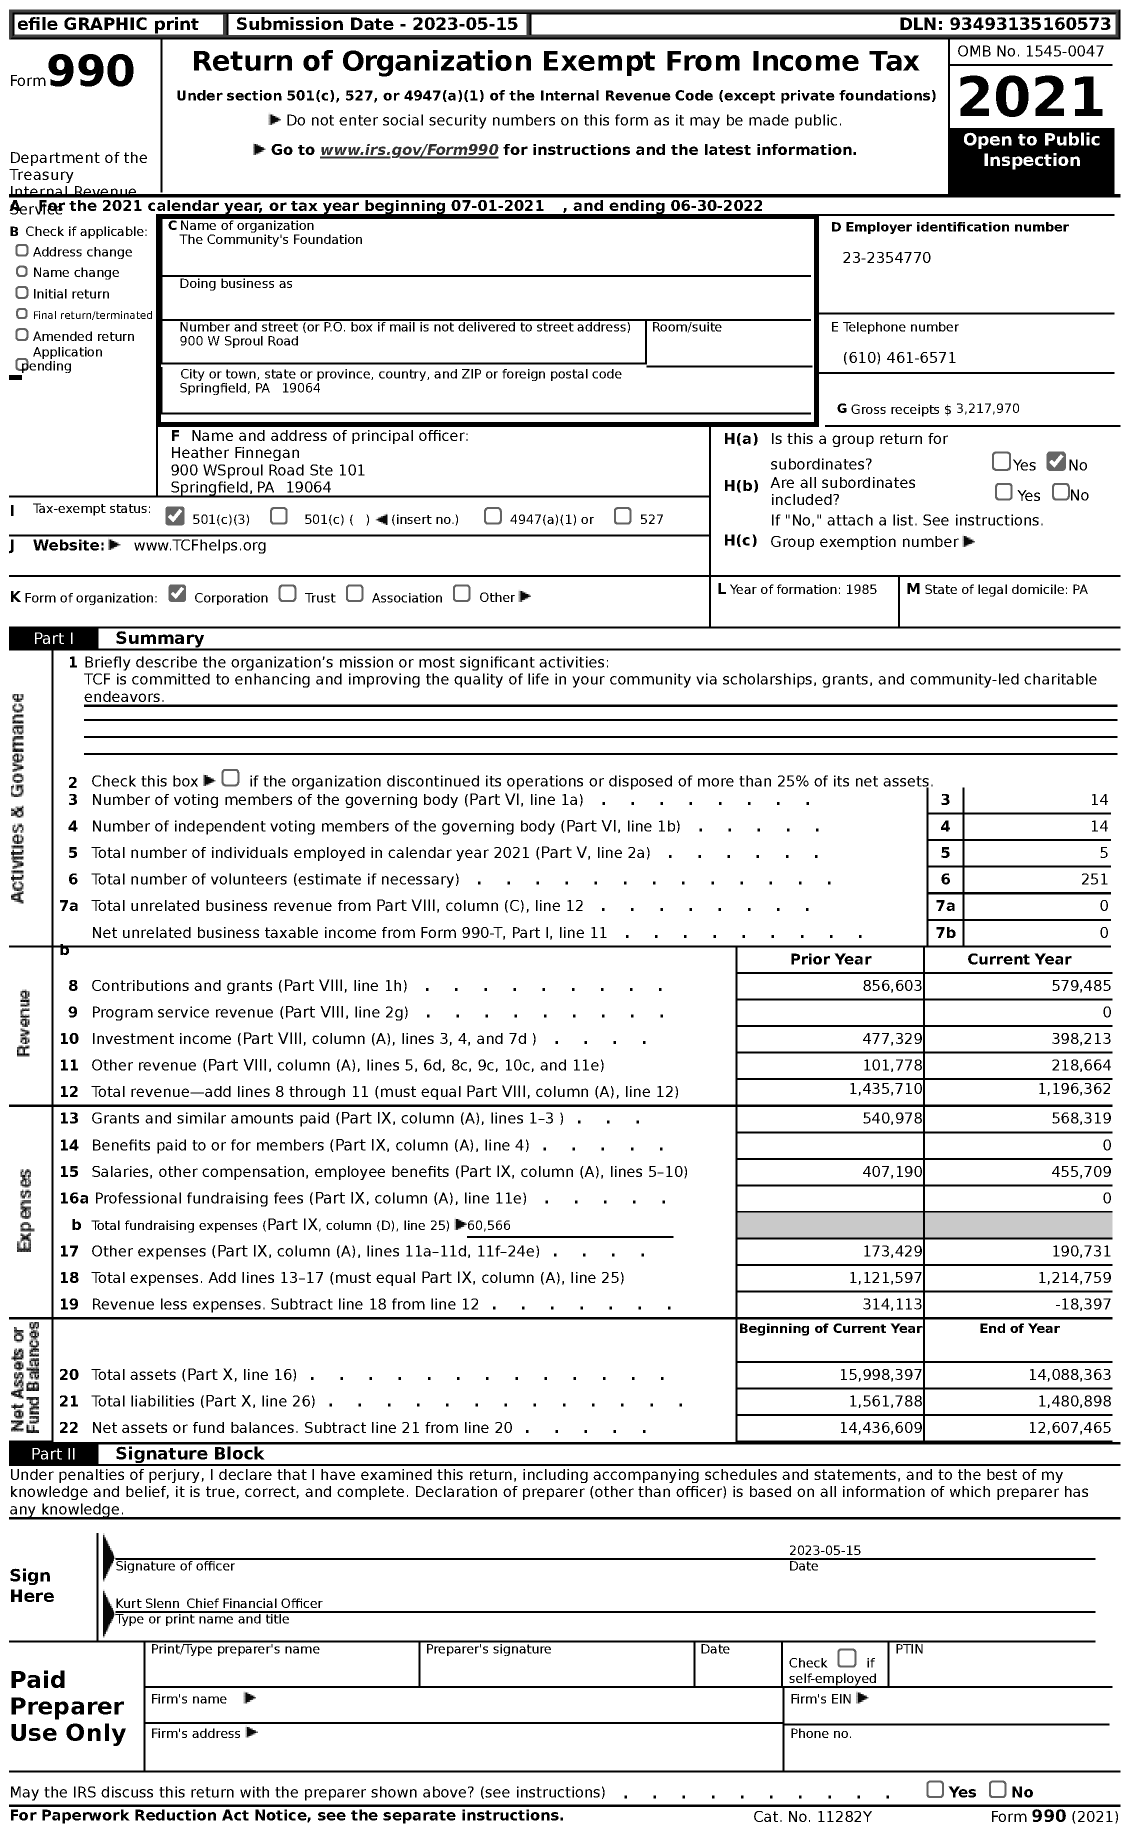 Image of first page of 2021 Form 990 for The Community's Foundation (TCF)